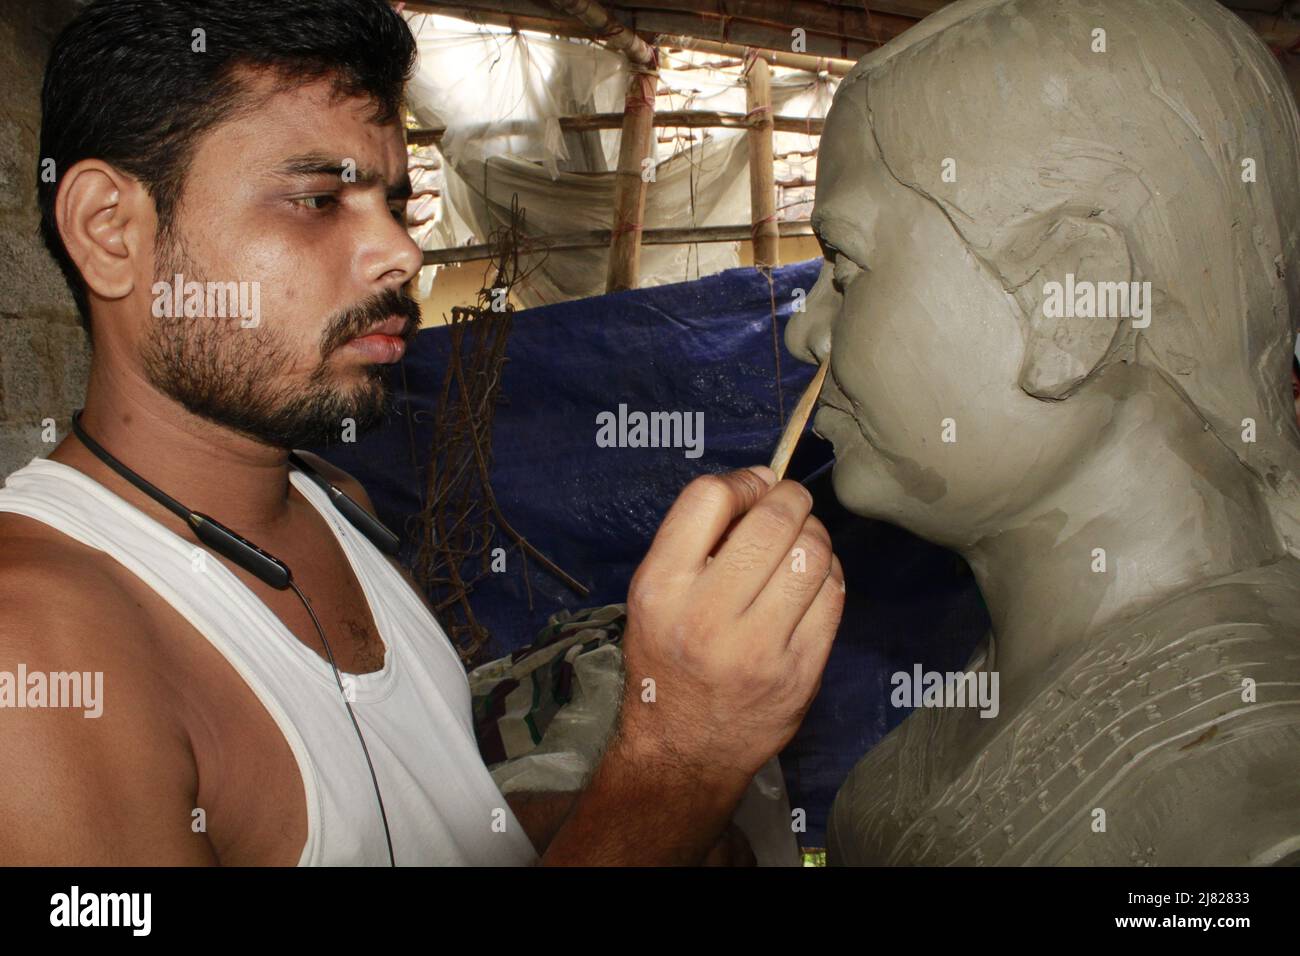 Man's hands making statue of clay. Stock Photo